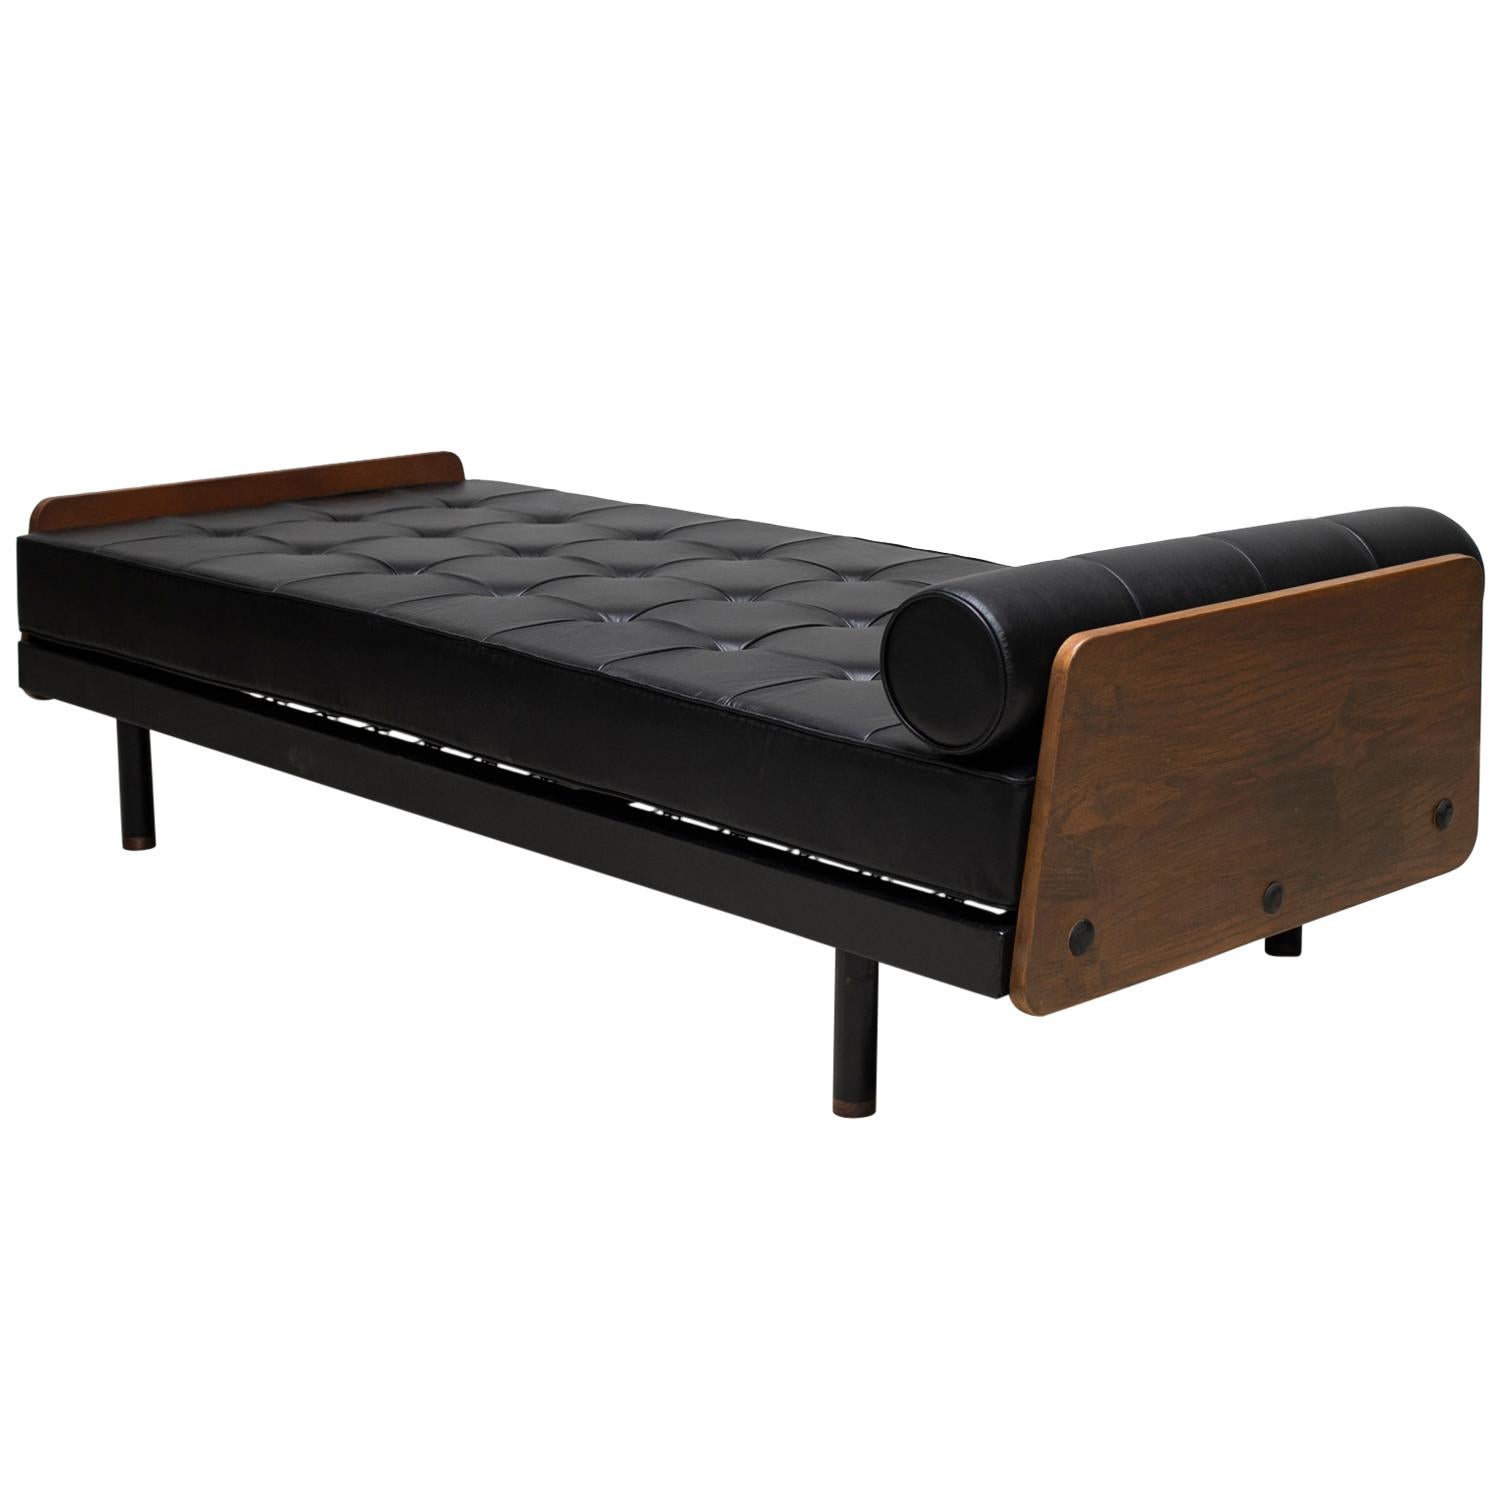 Jean Prouvé S.C.A.L Daybed n°452, circa 1950